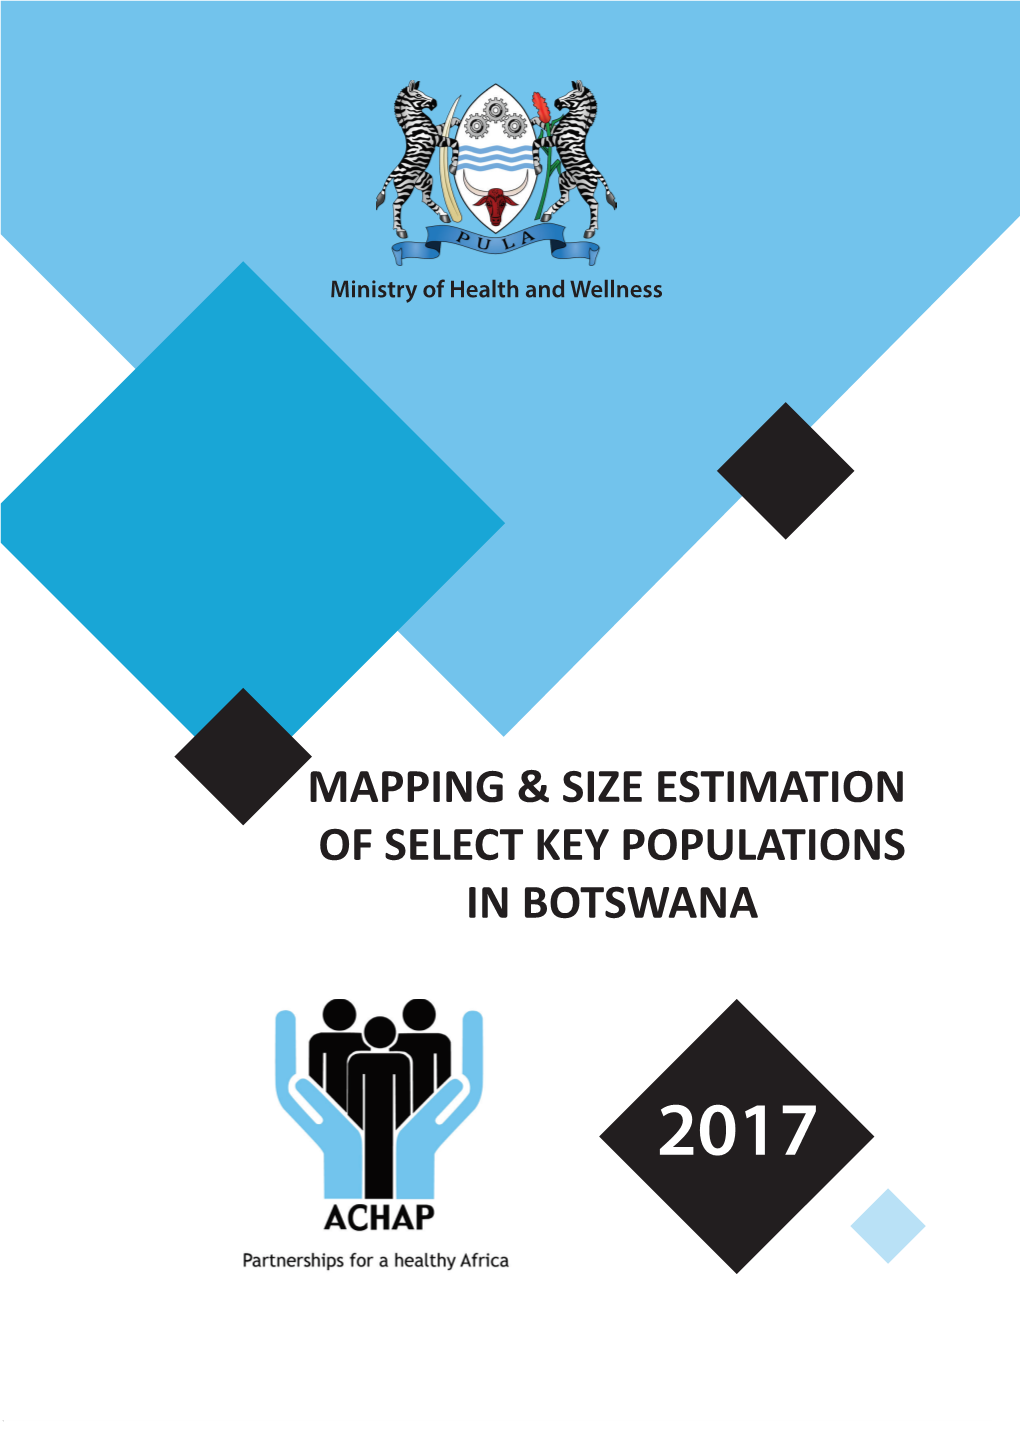 Mapping & Size Estimation of Select Key Populations in Botswana